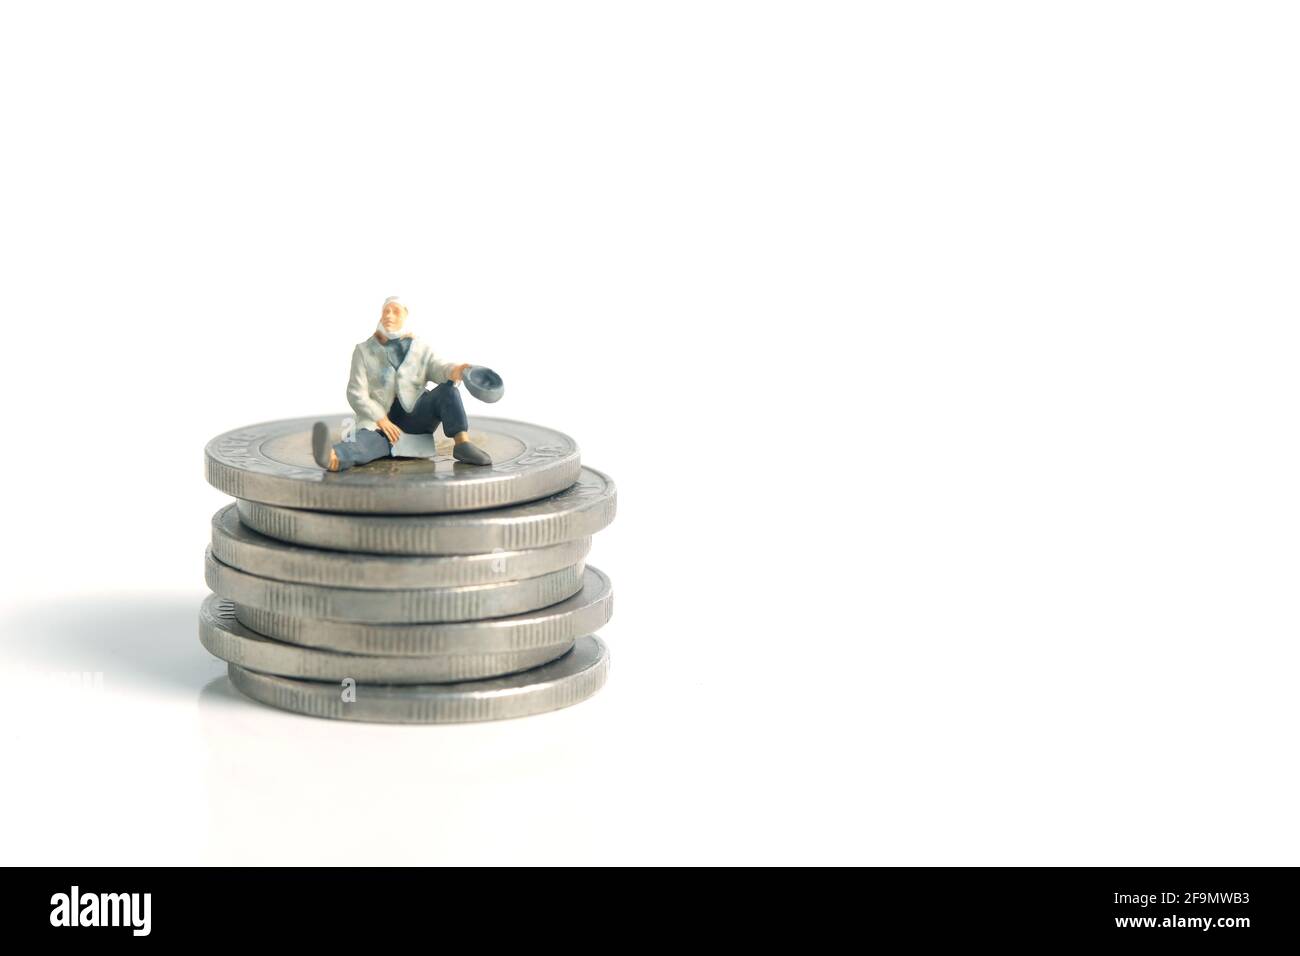 Miniature tiny people toys photography. A poor man or a beggar sit above money coin stack, isolated on white background Stock Photo